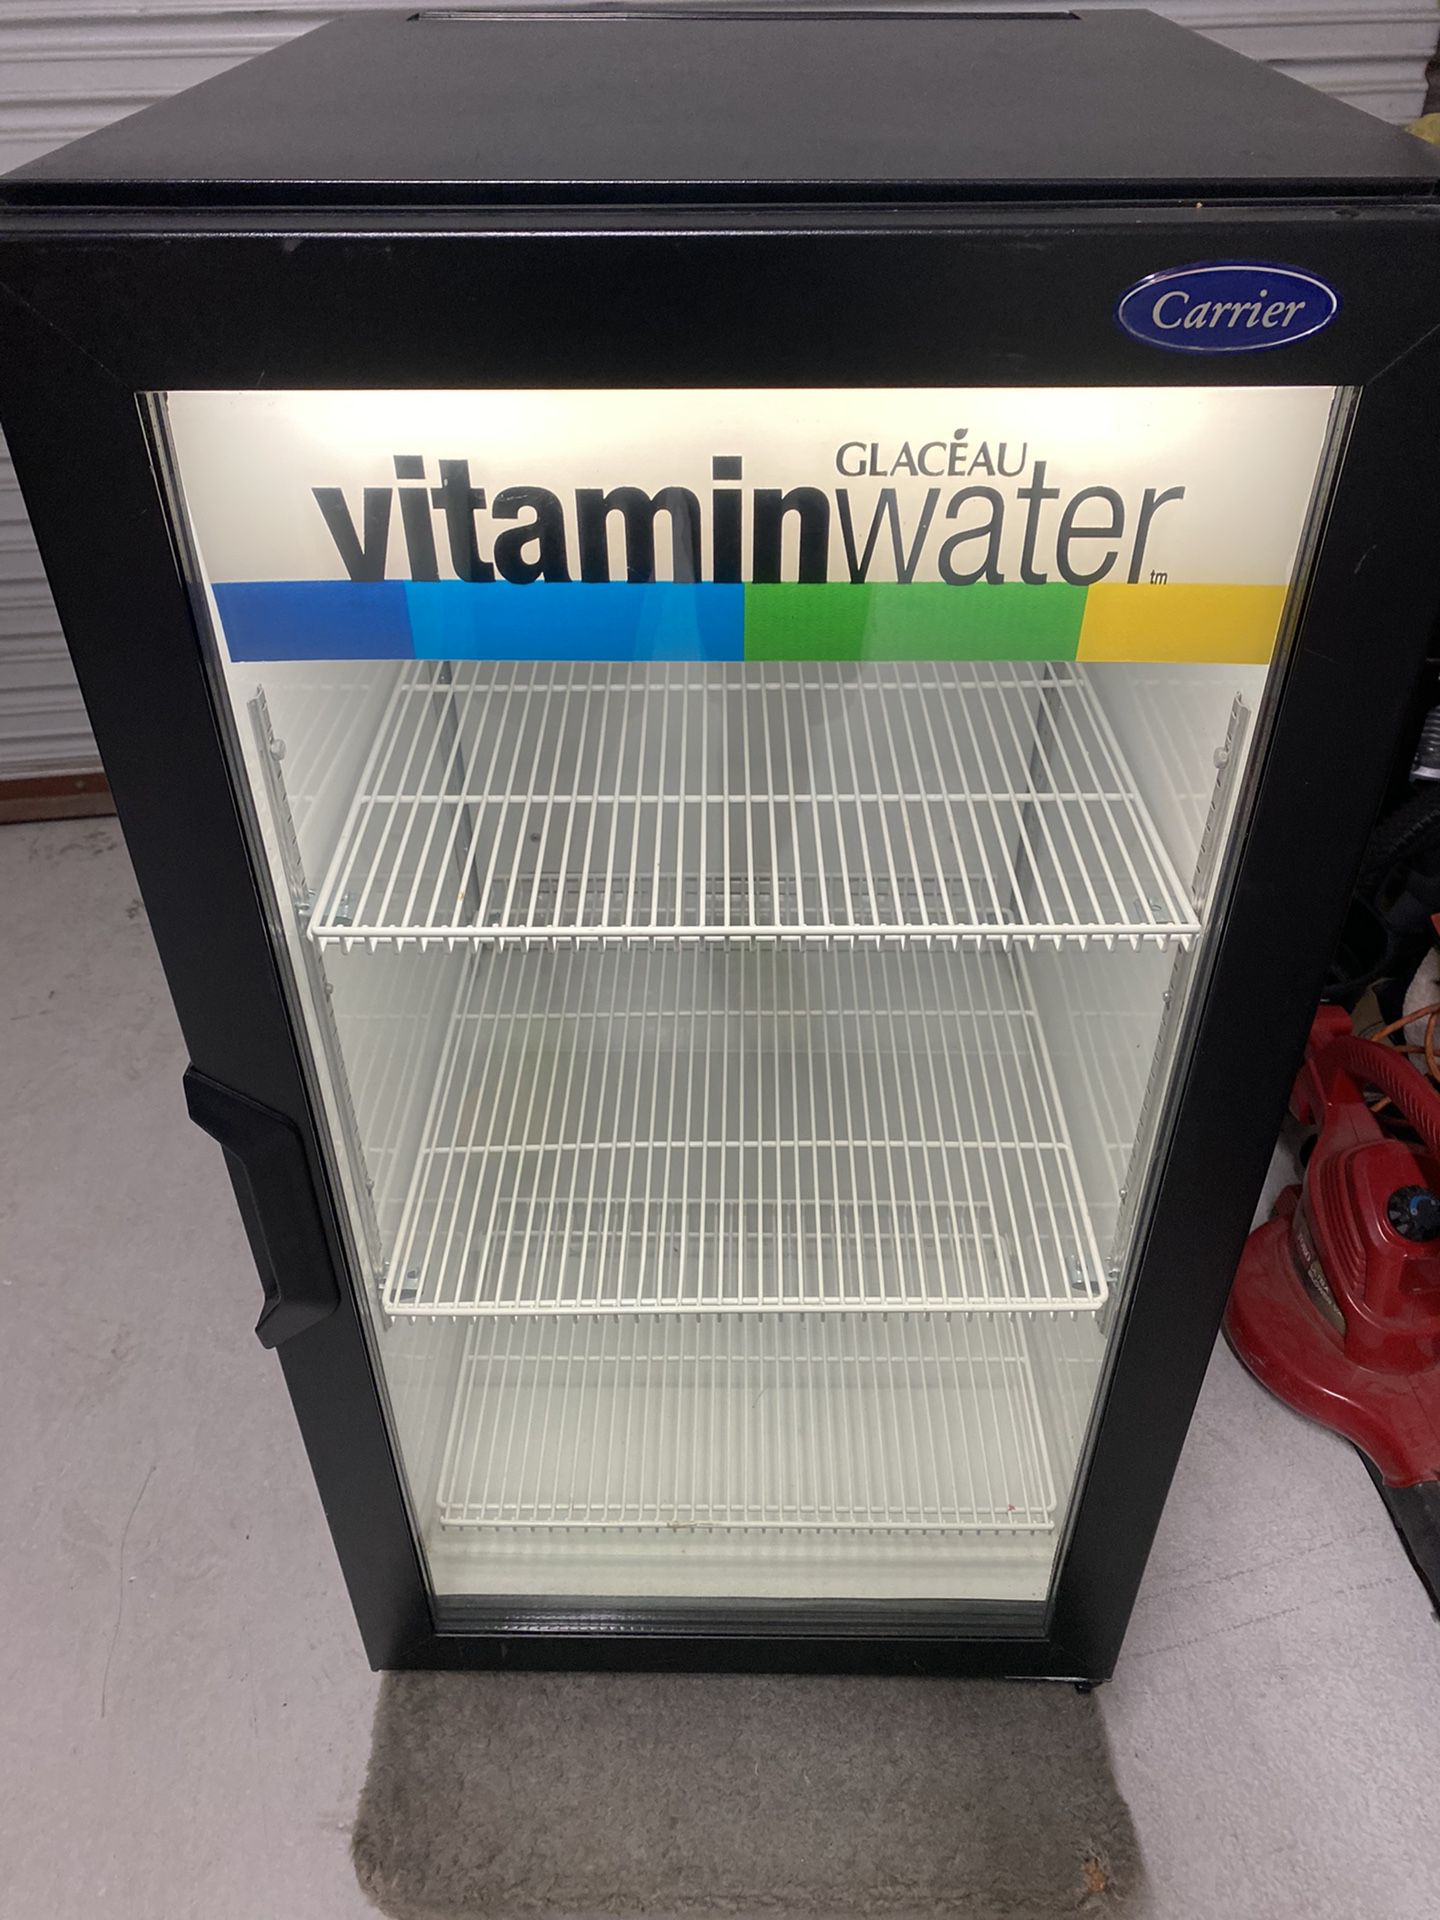 Carrier CT96 Commercial Beverage Air Refrigerator USED